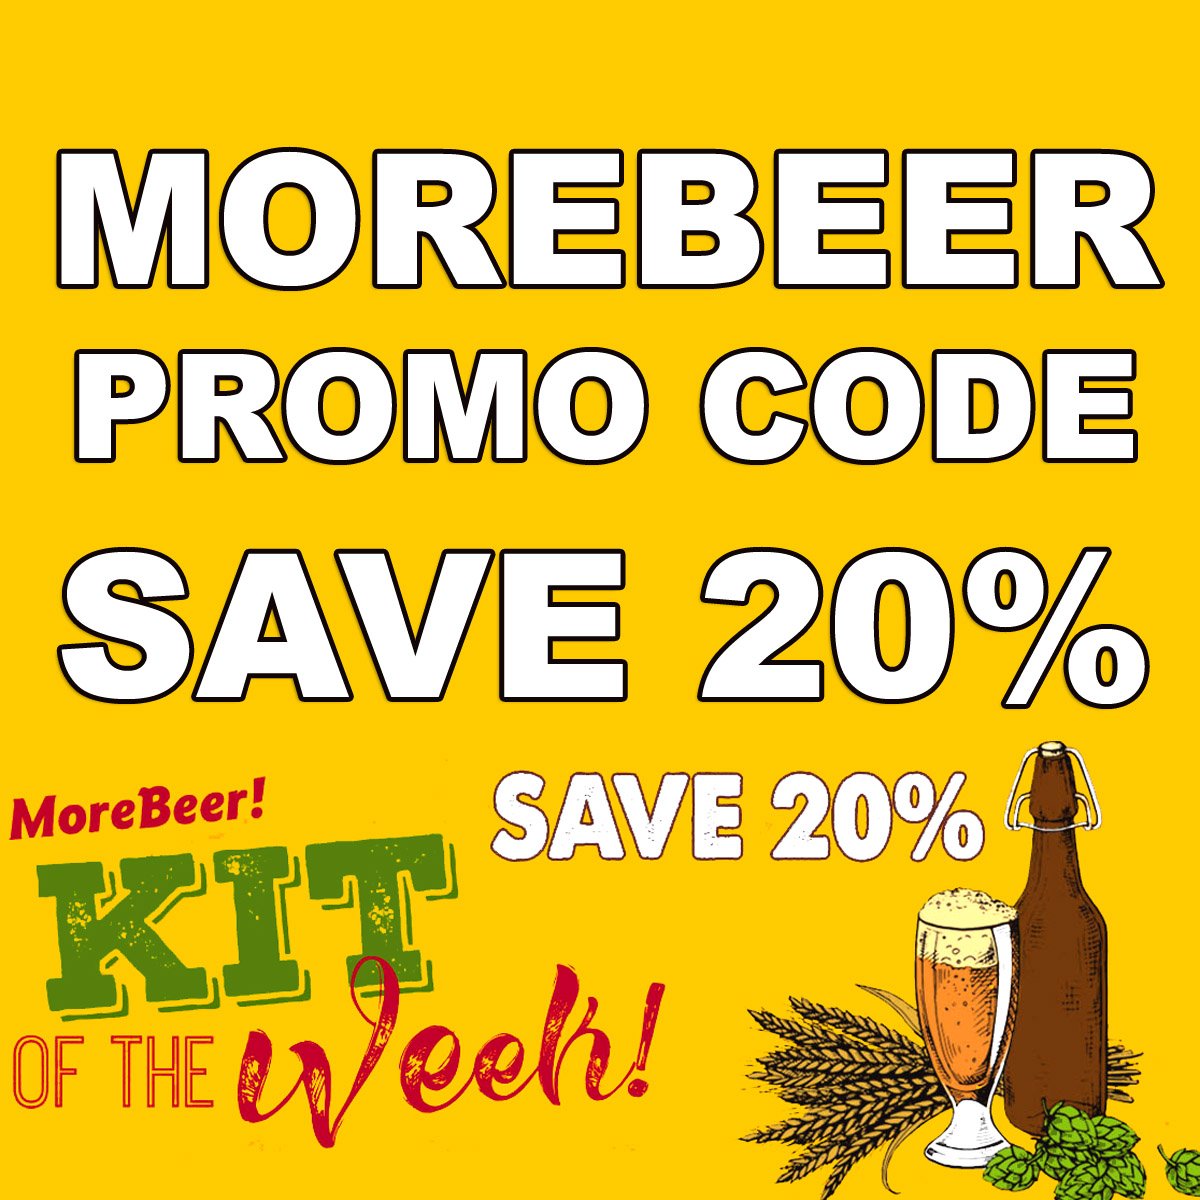 Save 20% At MoreBeer.com on the Beer Kit of the Week with this MoreBeer Promo Code